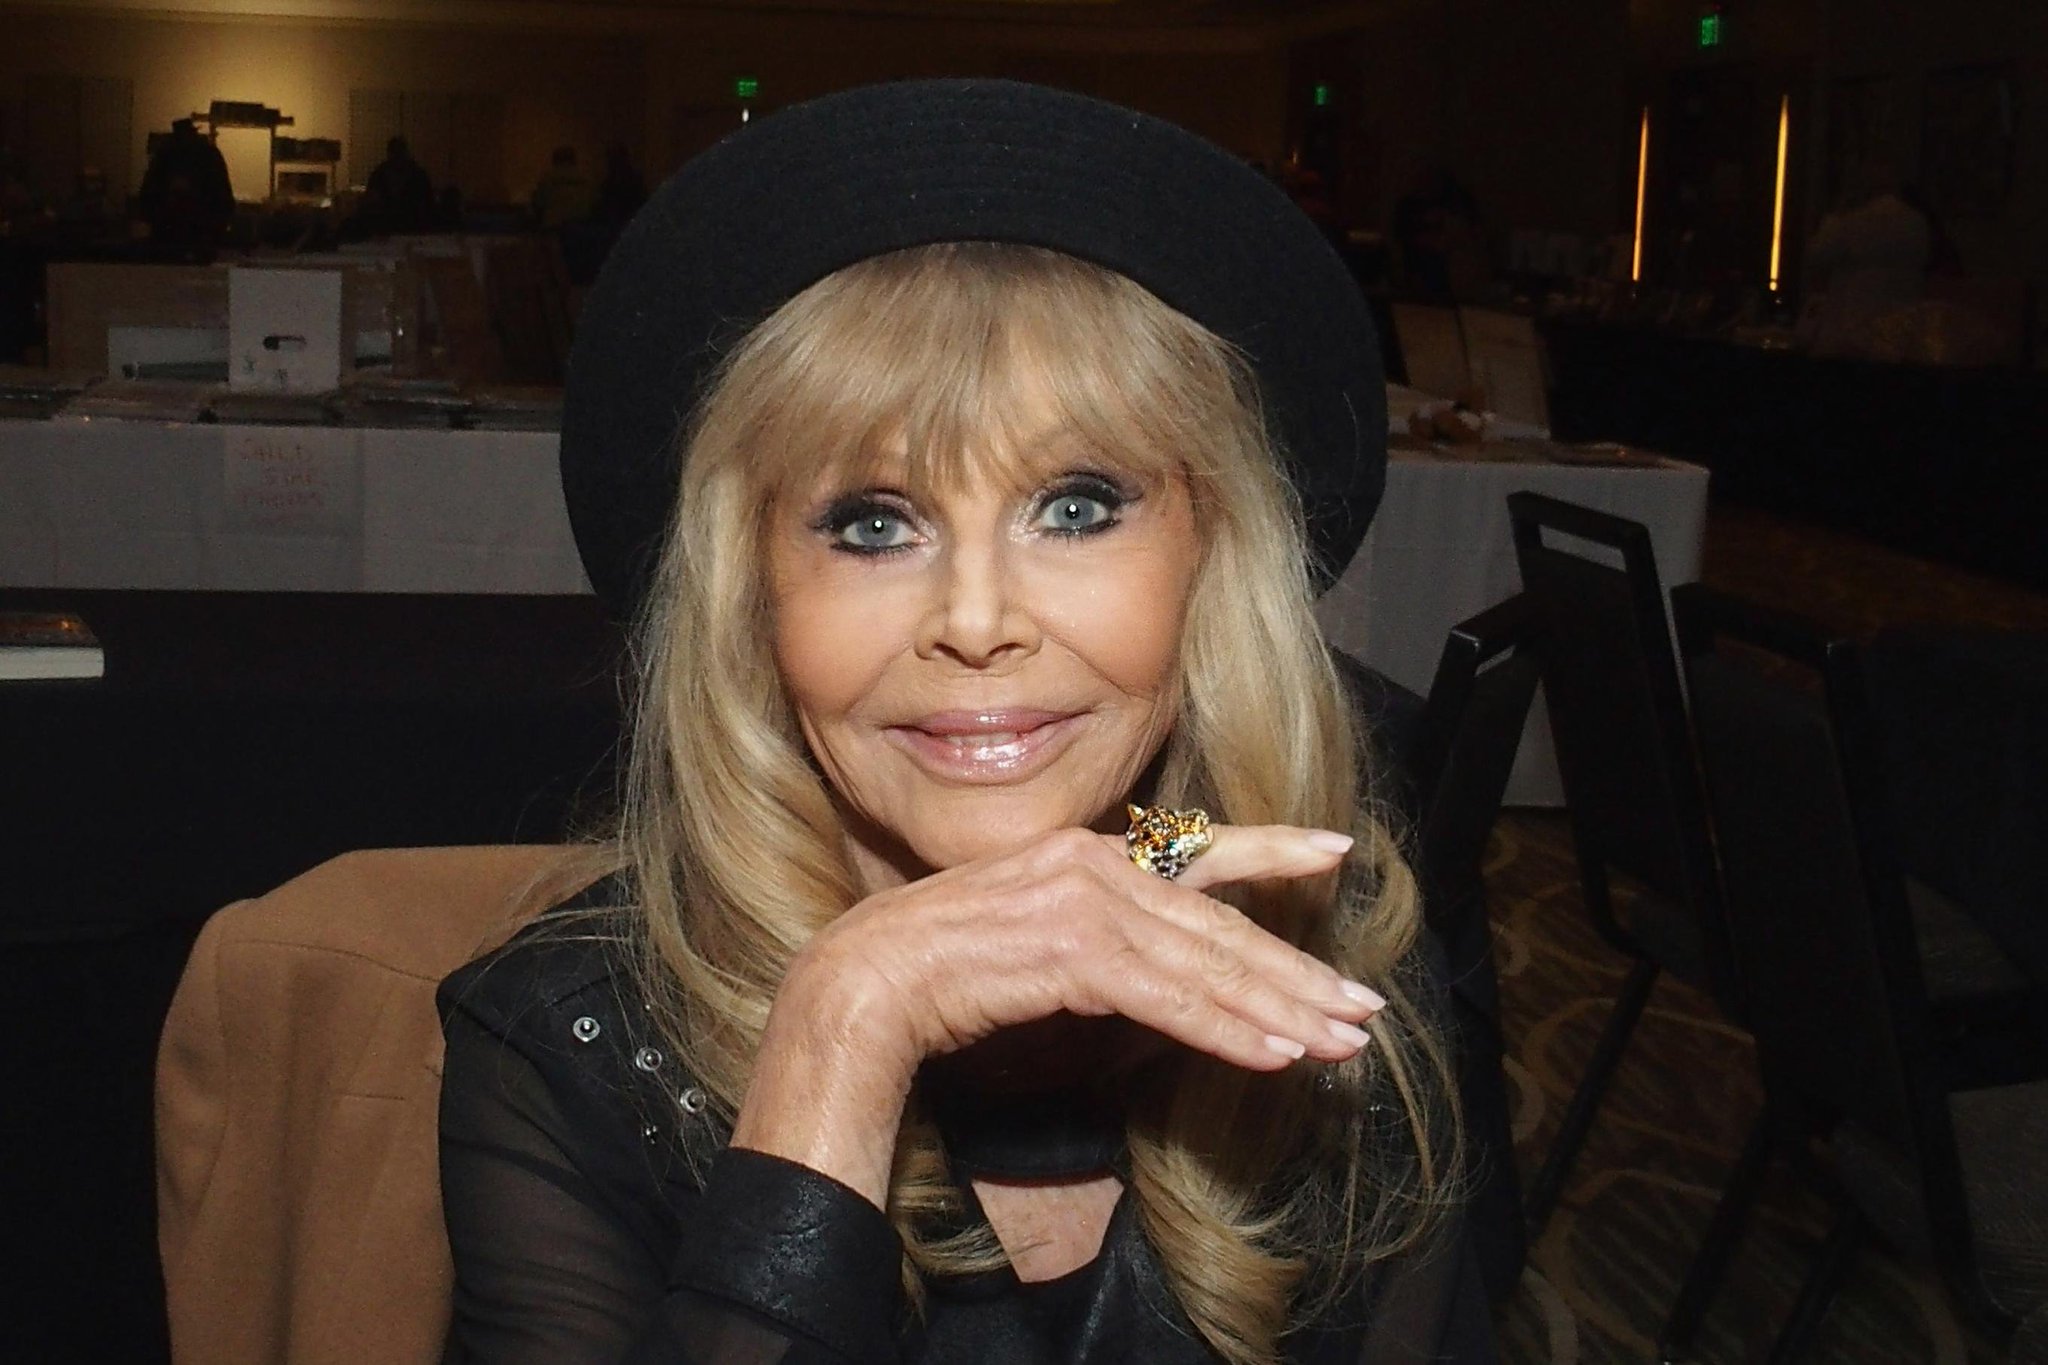 A huge Happy Birthday to the one and only Britt Ekland.

Many happy returns 